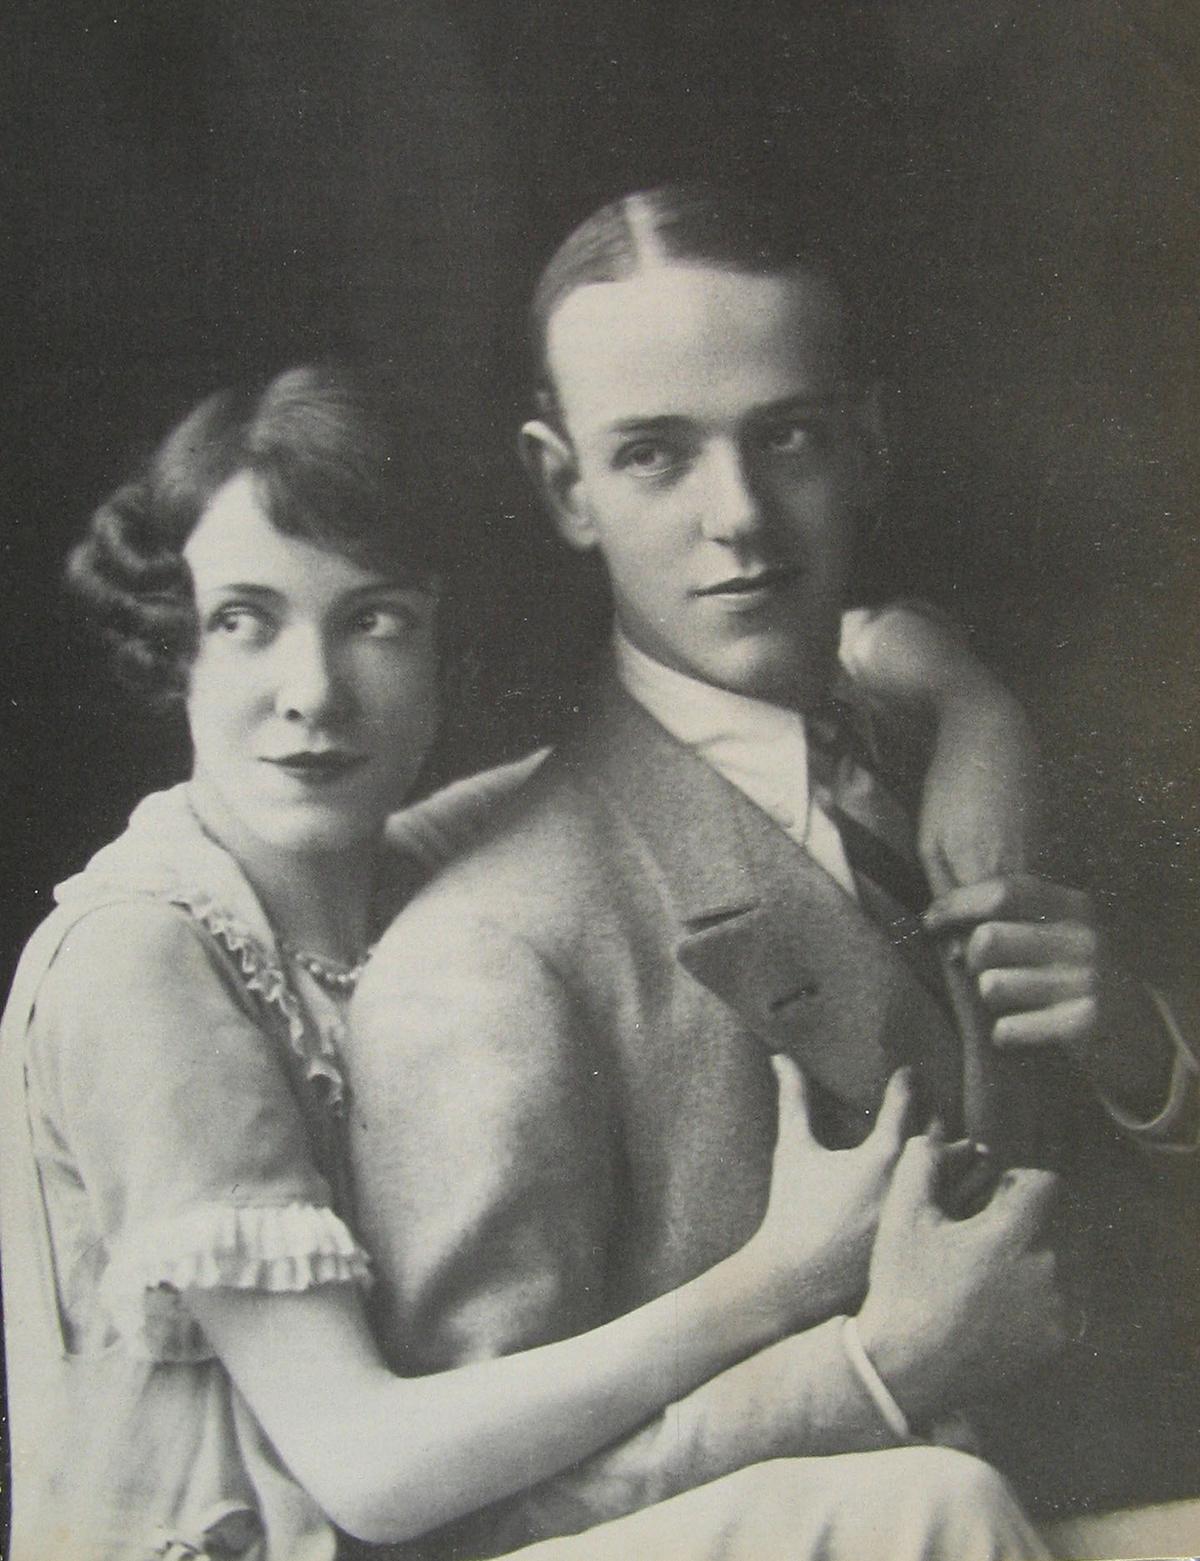 When <span style="font-weight: 400;">Adele was 8 and Fred, 5, their mother enrolled them in a theater school in New York. </span>A publicity photograph of Fred and Adele Astaire, 1919. (Public Domain)